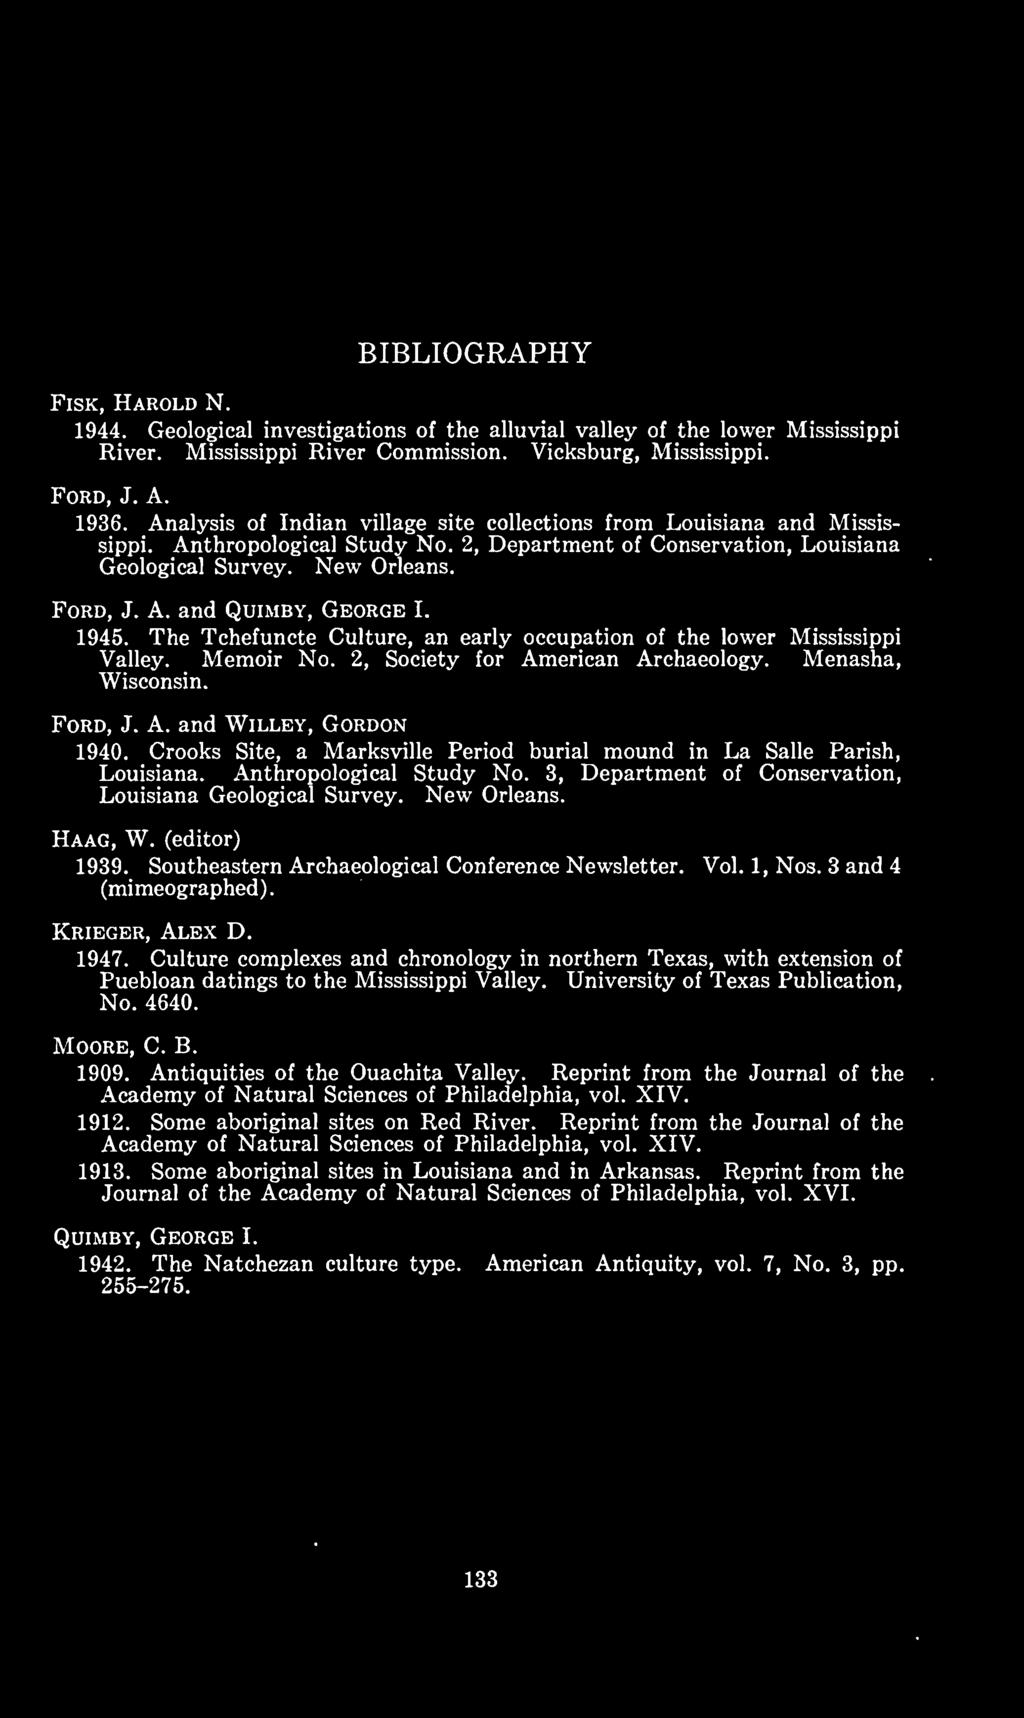 Southeastern Archaeological Conference Newsletter. Vol. 1, Nos. 3 and 4 (mimeographed). Krieger, Alex D. 1947.